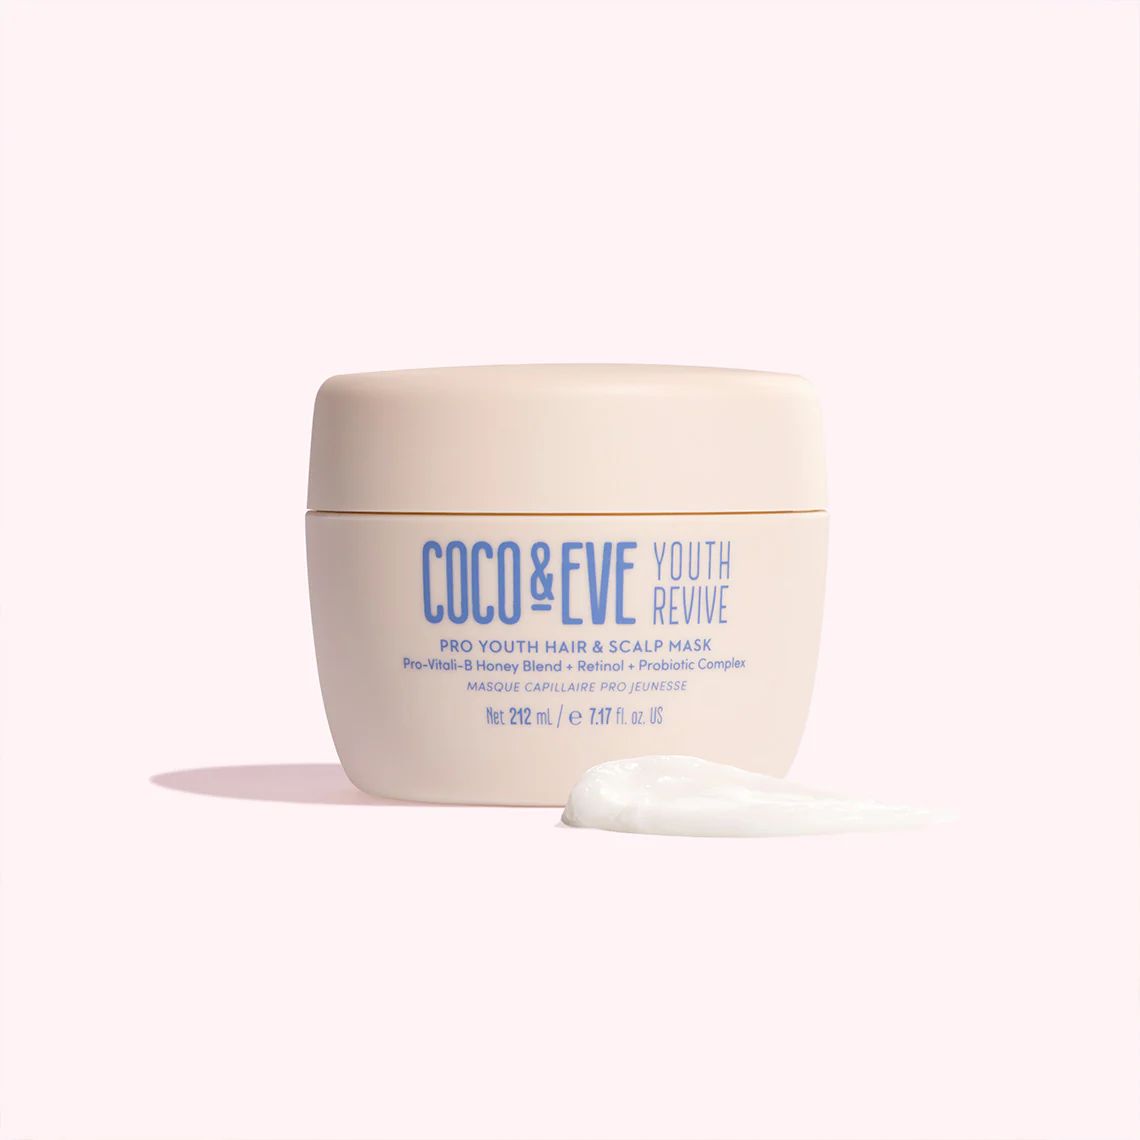 Pro Youth Hair & Scalp Mask | Coco&Eve